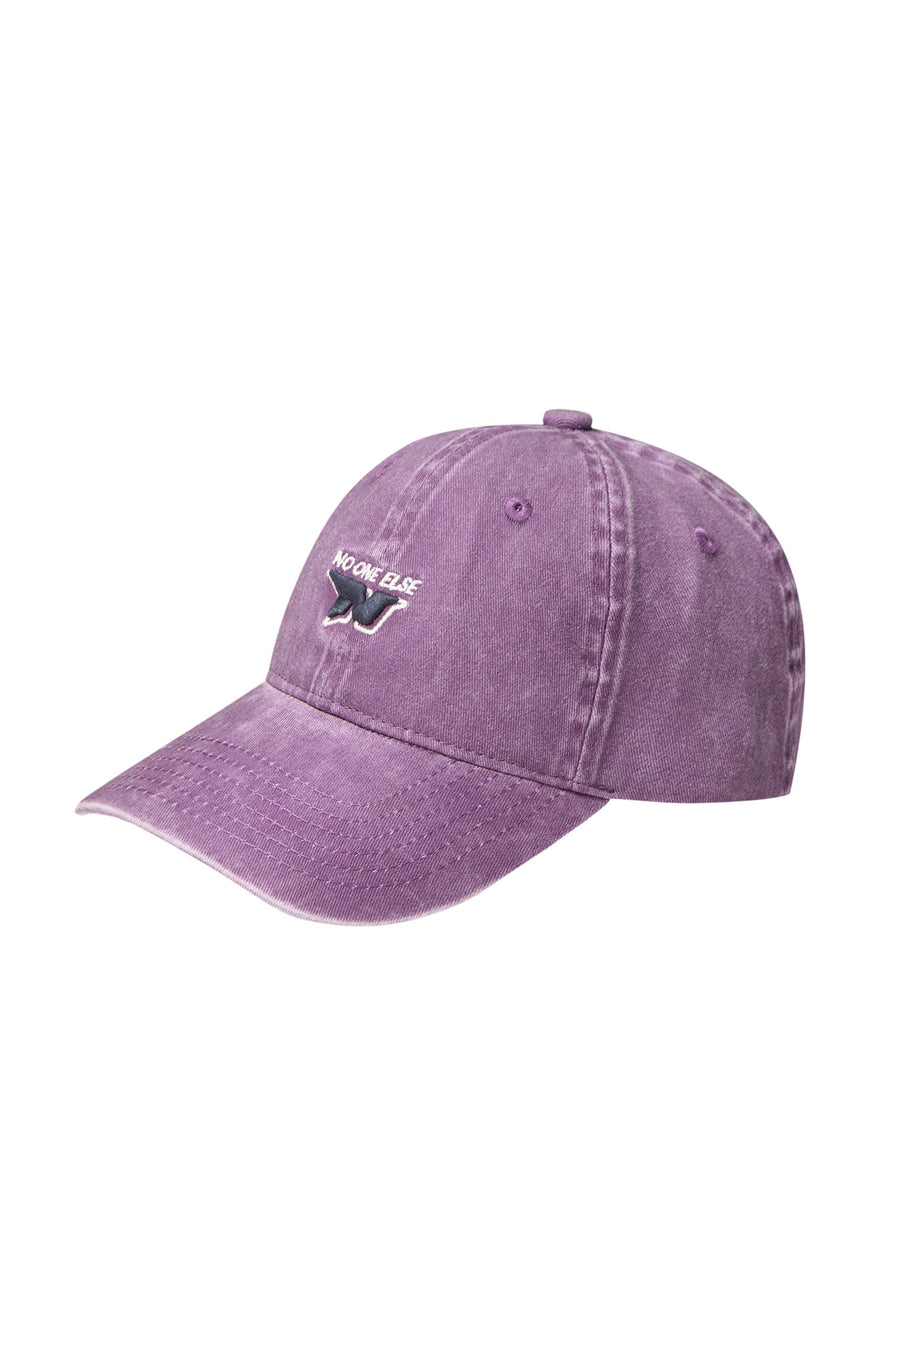 CHUU Vintage Embroidered Ball Cap